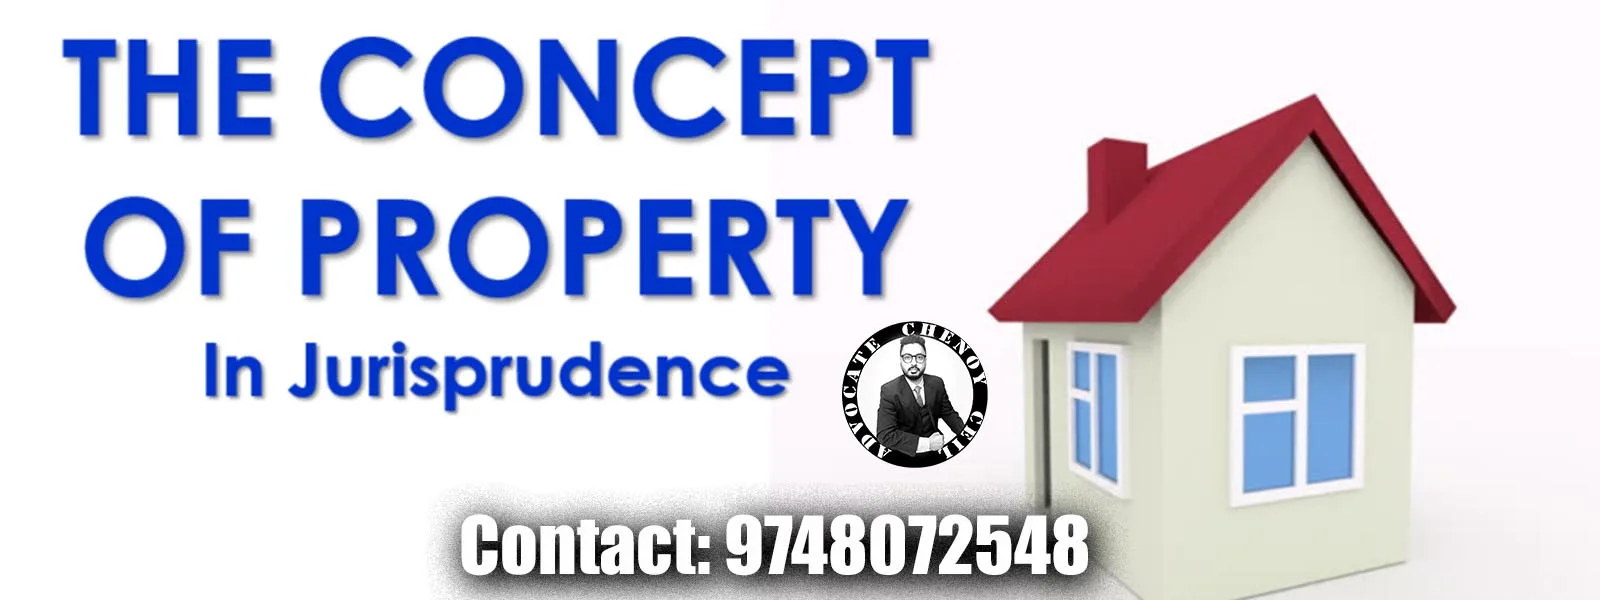 concept of property